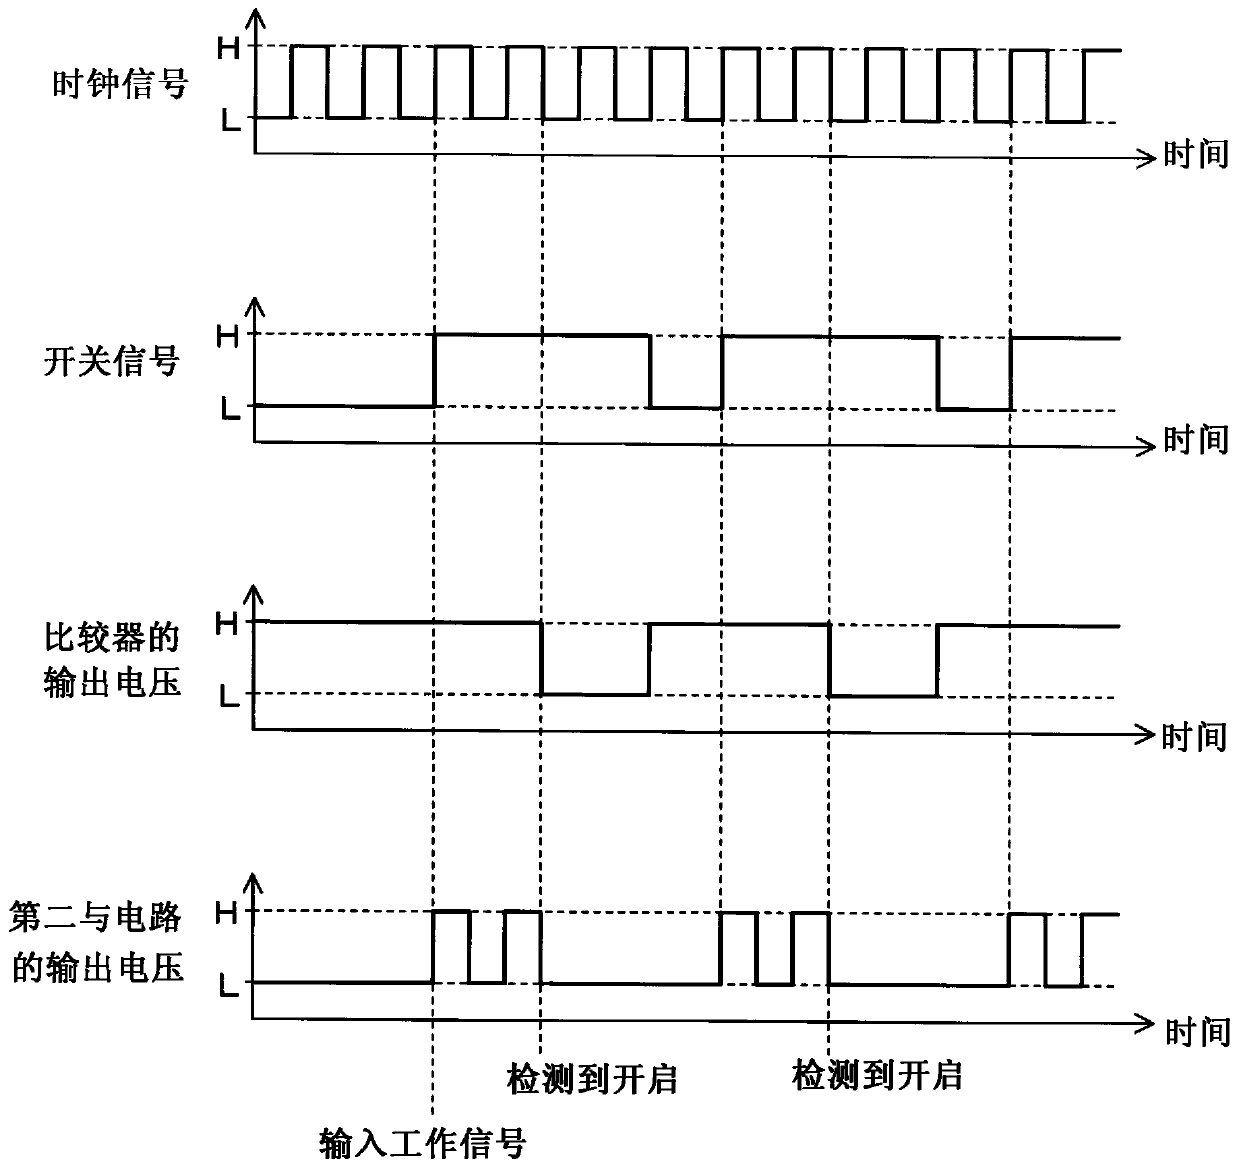 Power supply control device and power supply control method